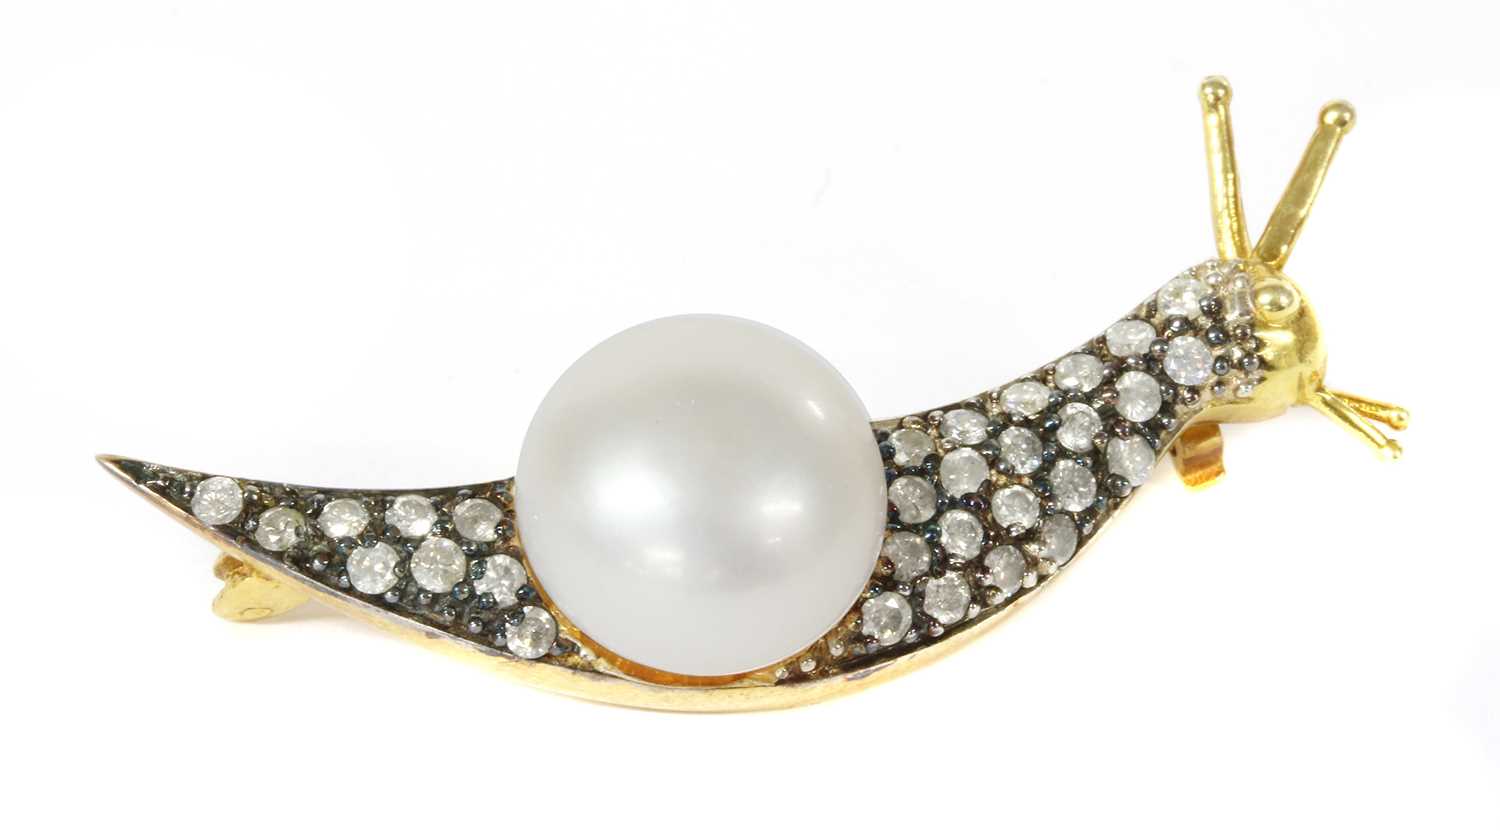 Lot 210 - A silver cultured freshwater pearl and diamond snail brooch